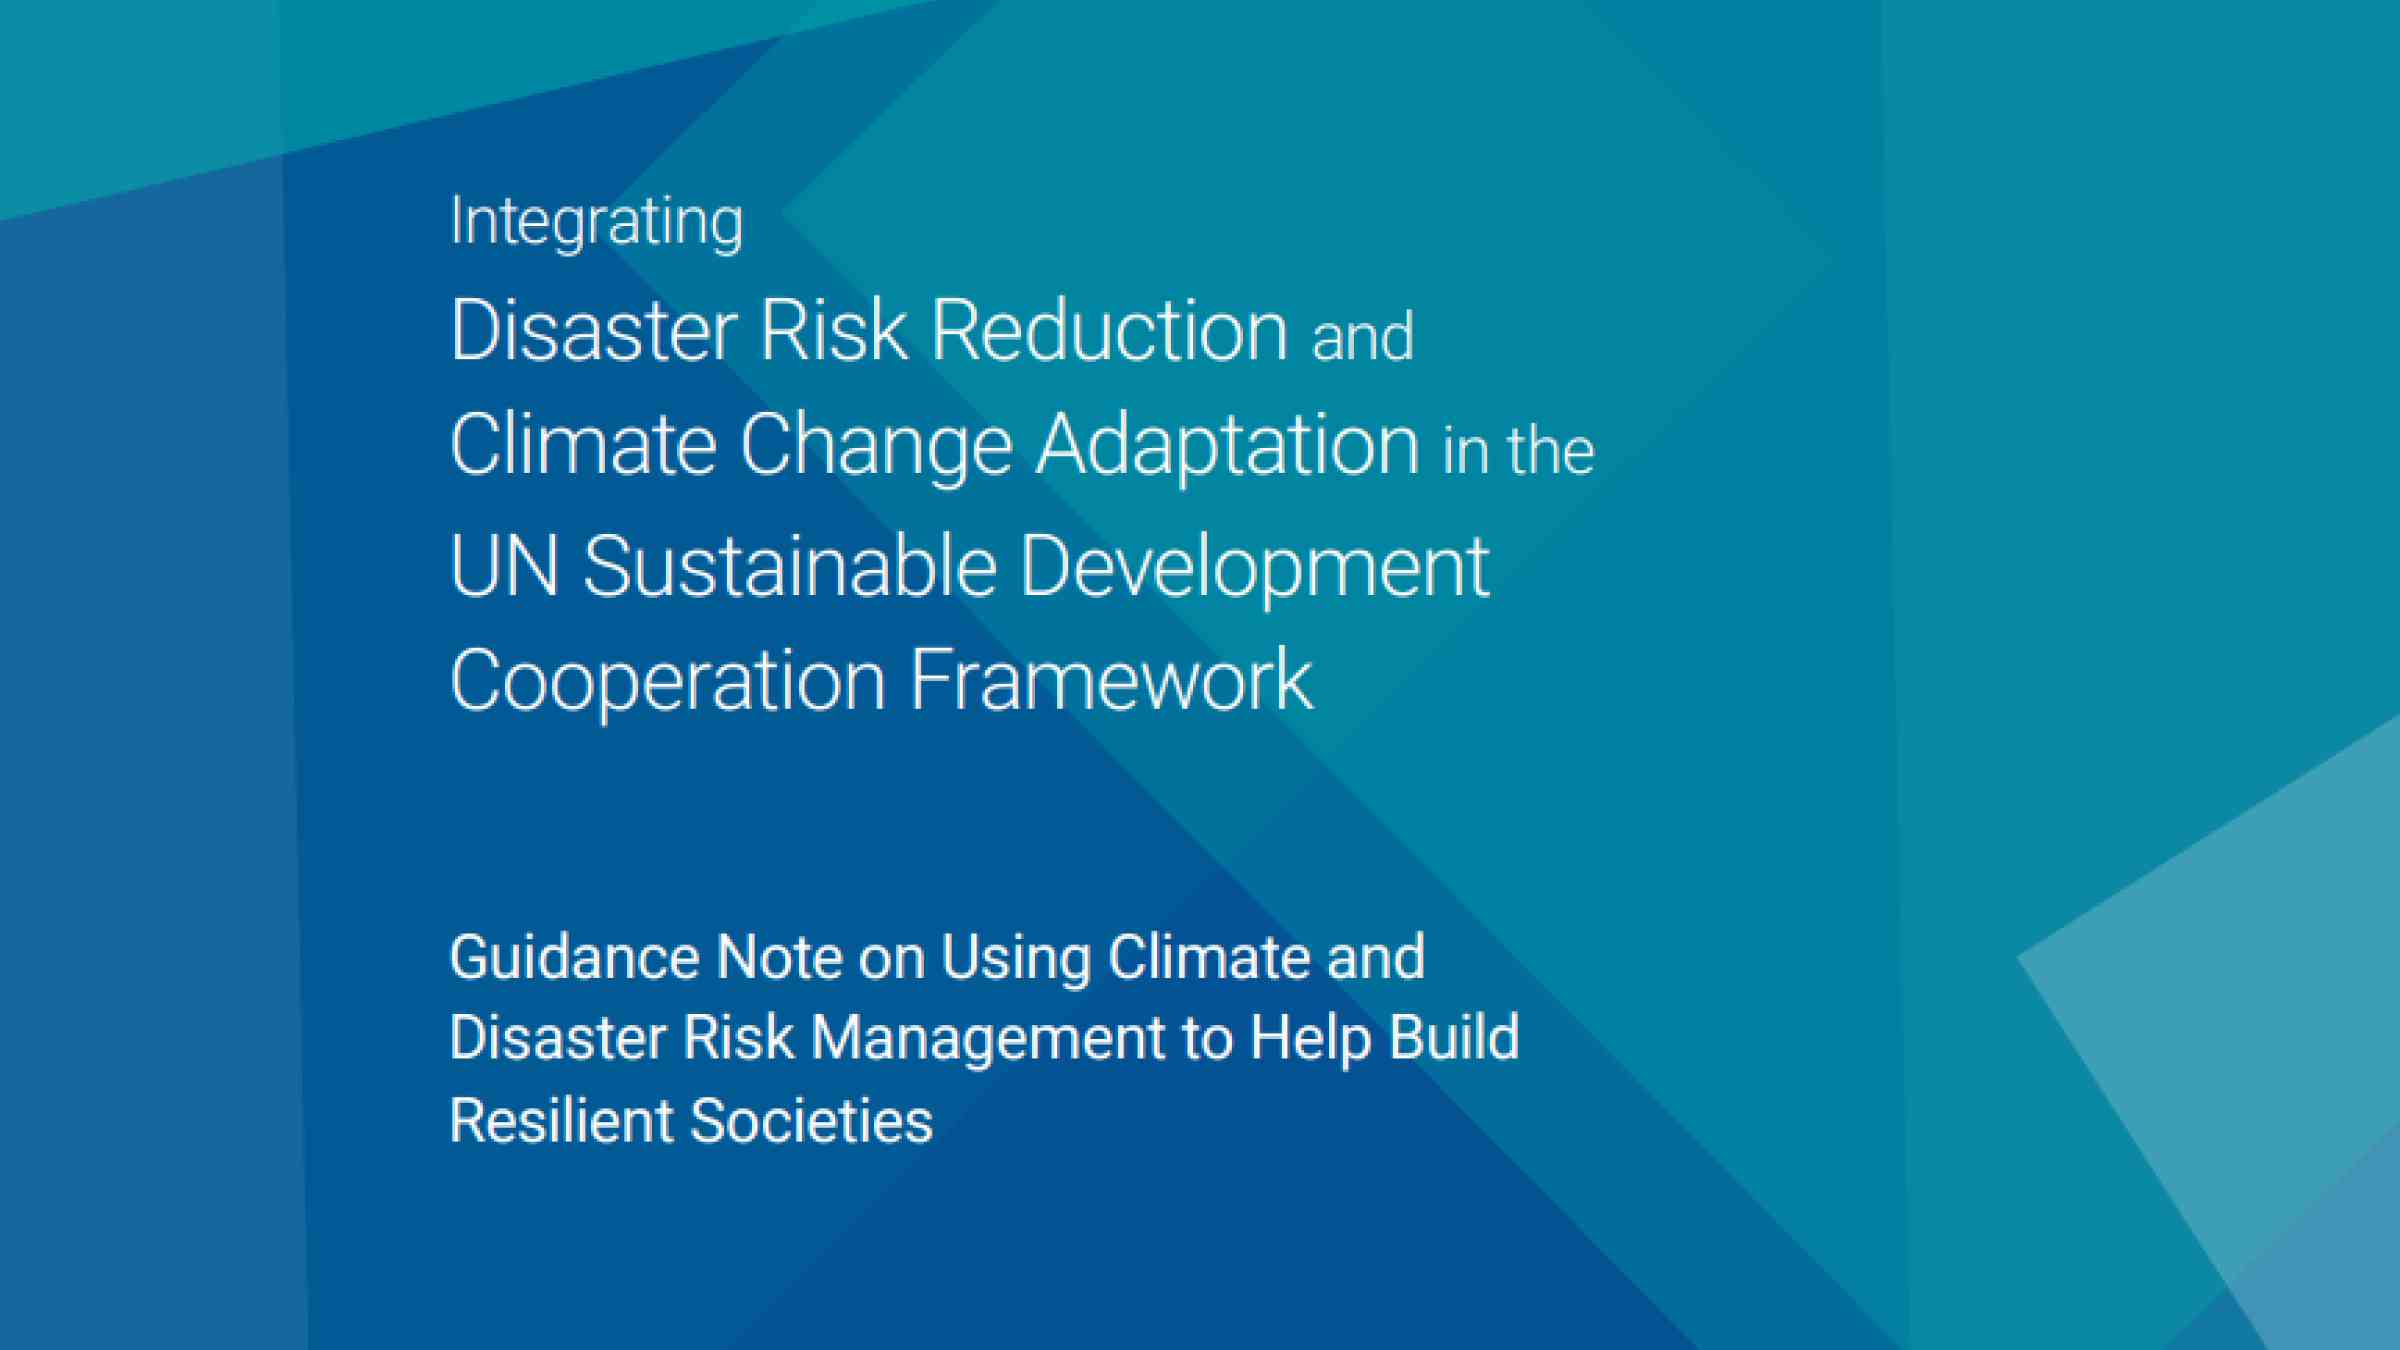 Integrating Disaster Risk Reduction and Climate Change Adaptation in the UN Sustainable Development Cooperation Framework